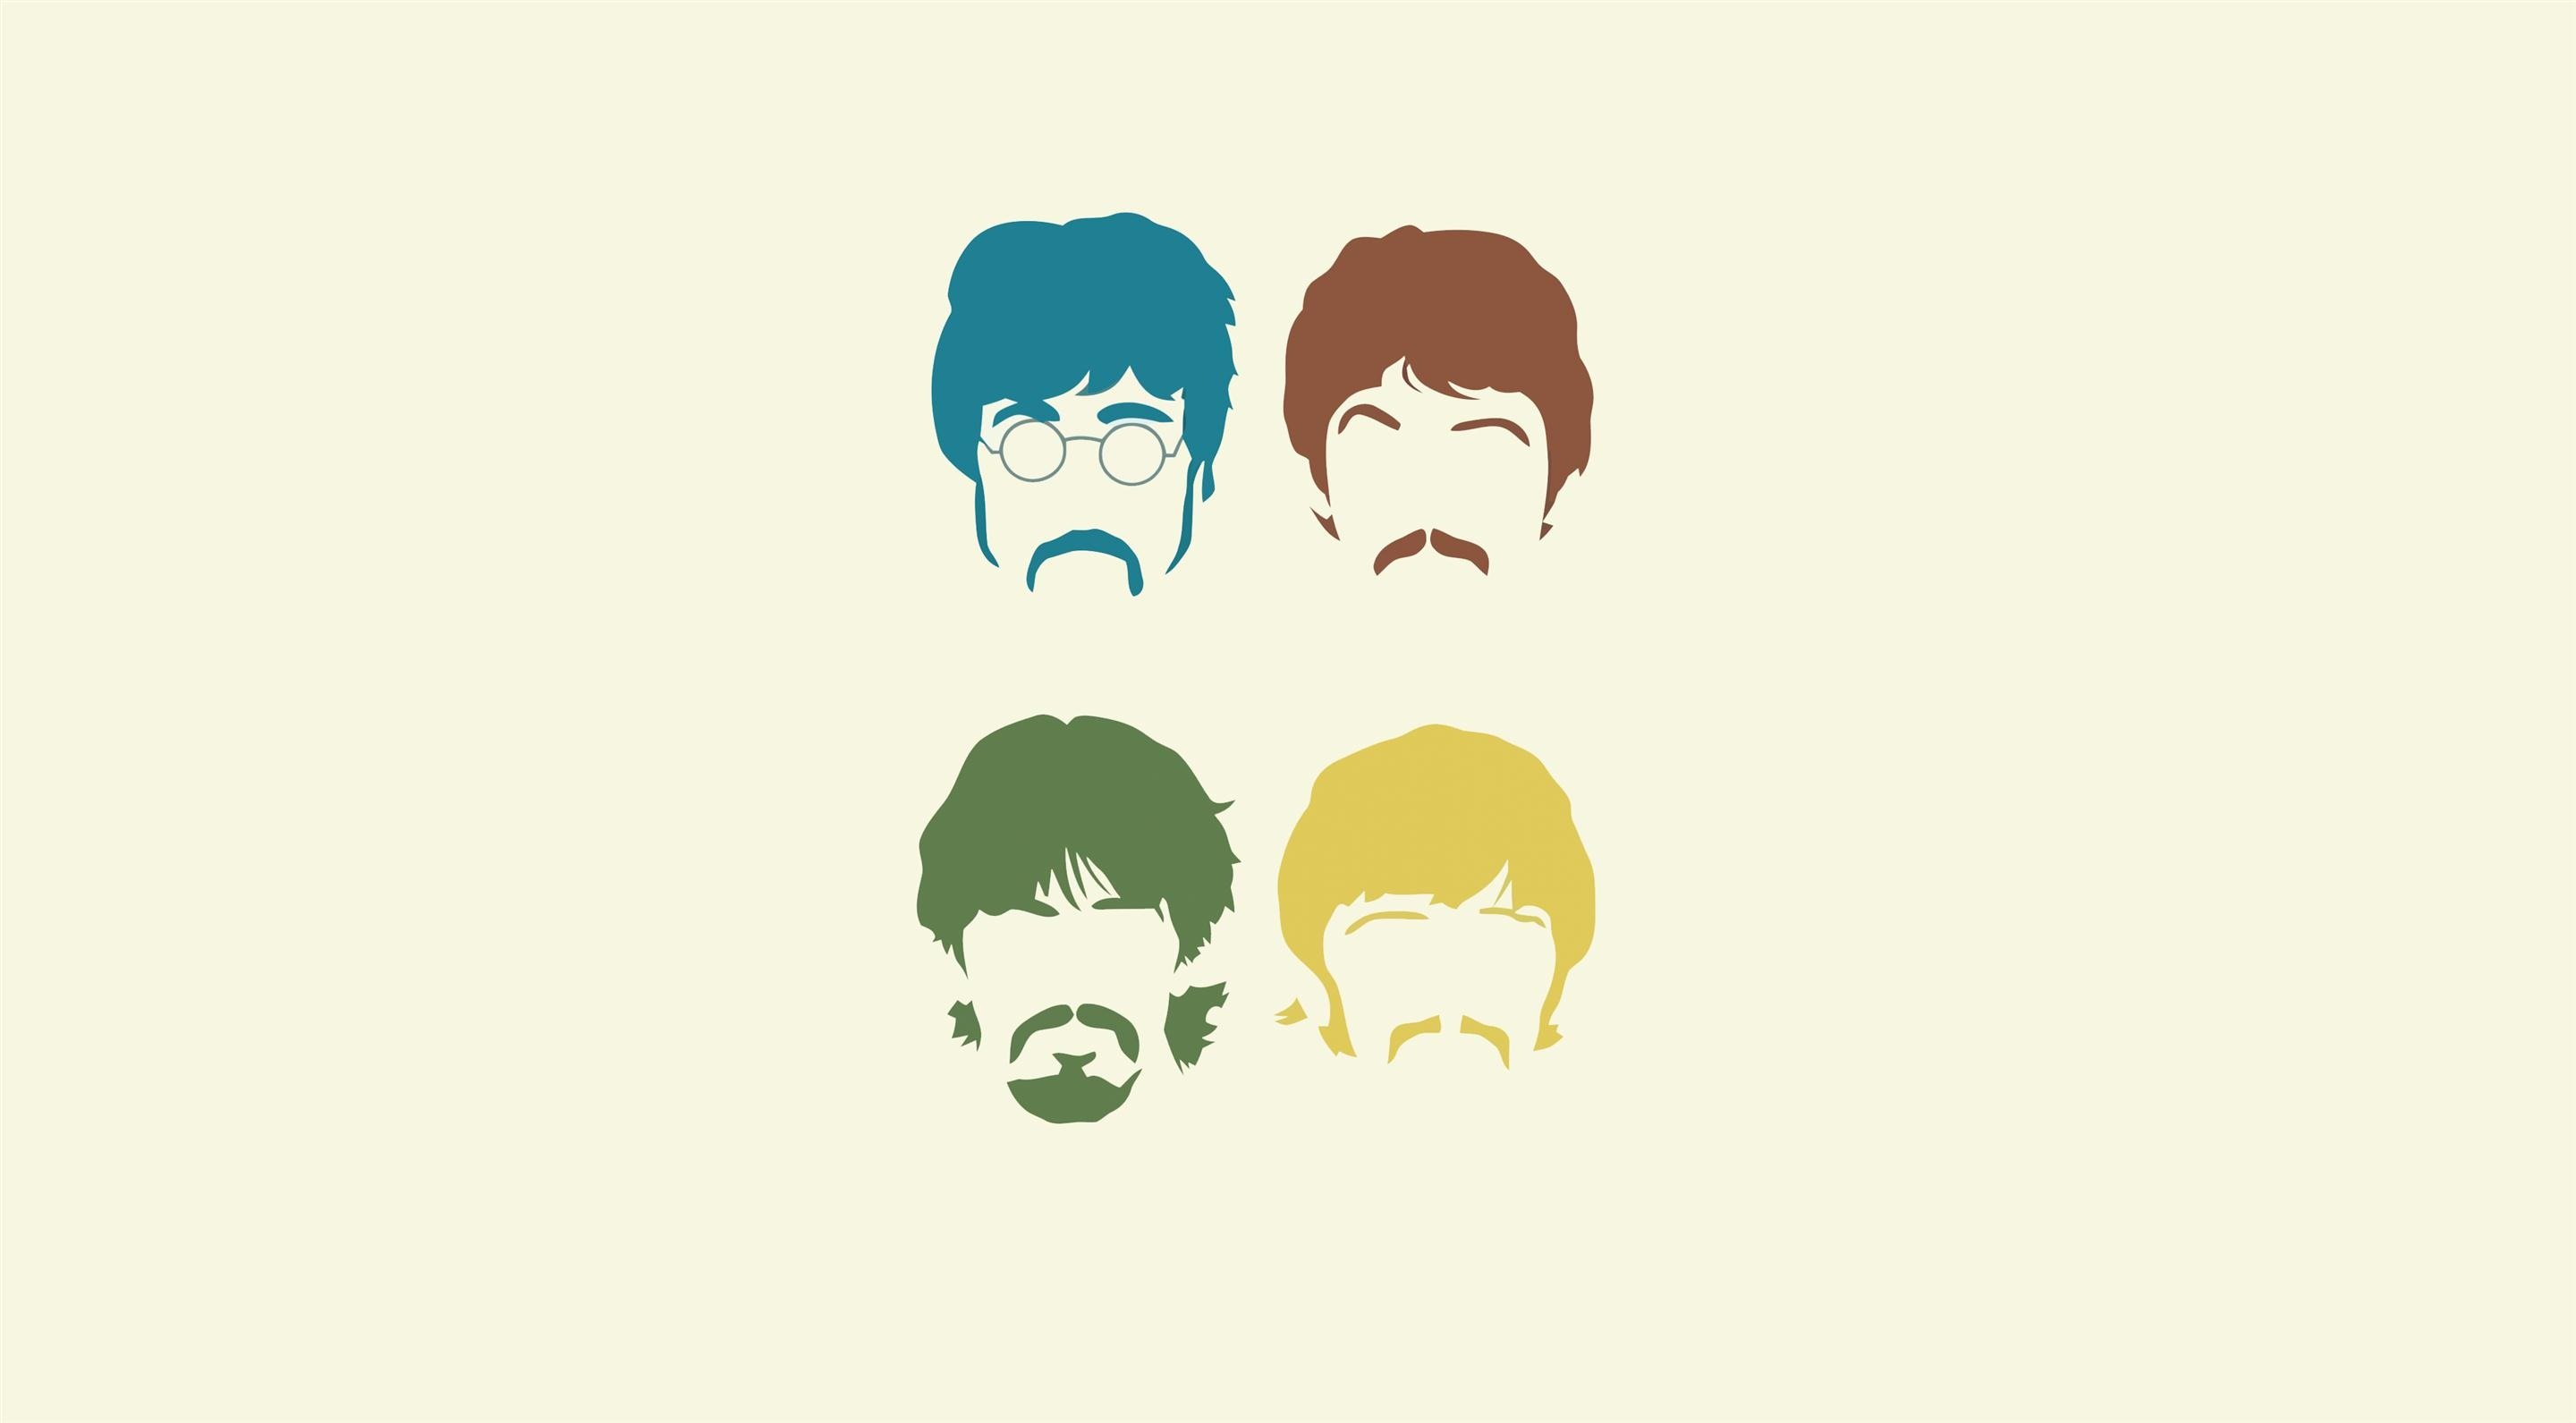 Free Download Beatles 4k Wallpapers For Your Desktop Or Mobile Screen And x1591 For Your Desktop Mobile Tablet Explore 27 Beatles Backgrounds Beatles Wallpaper Vintage Beatles Wallpaper Beatles Iphone Wallpaper